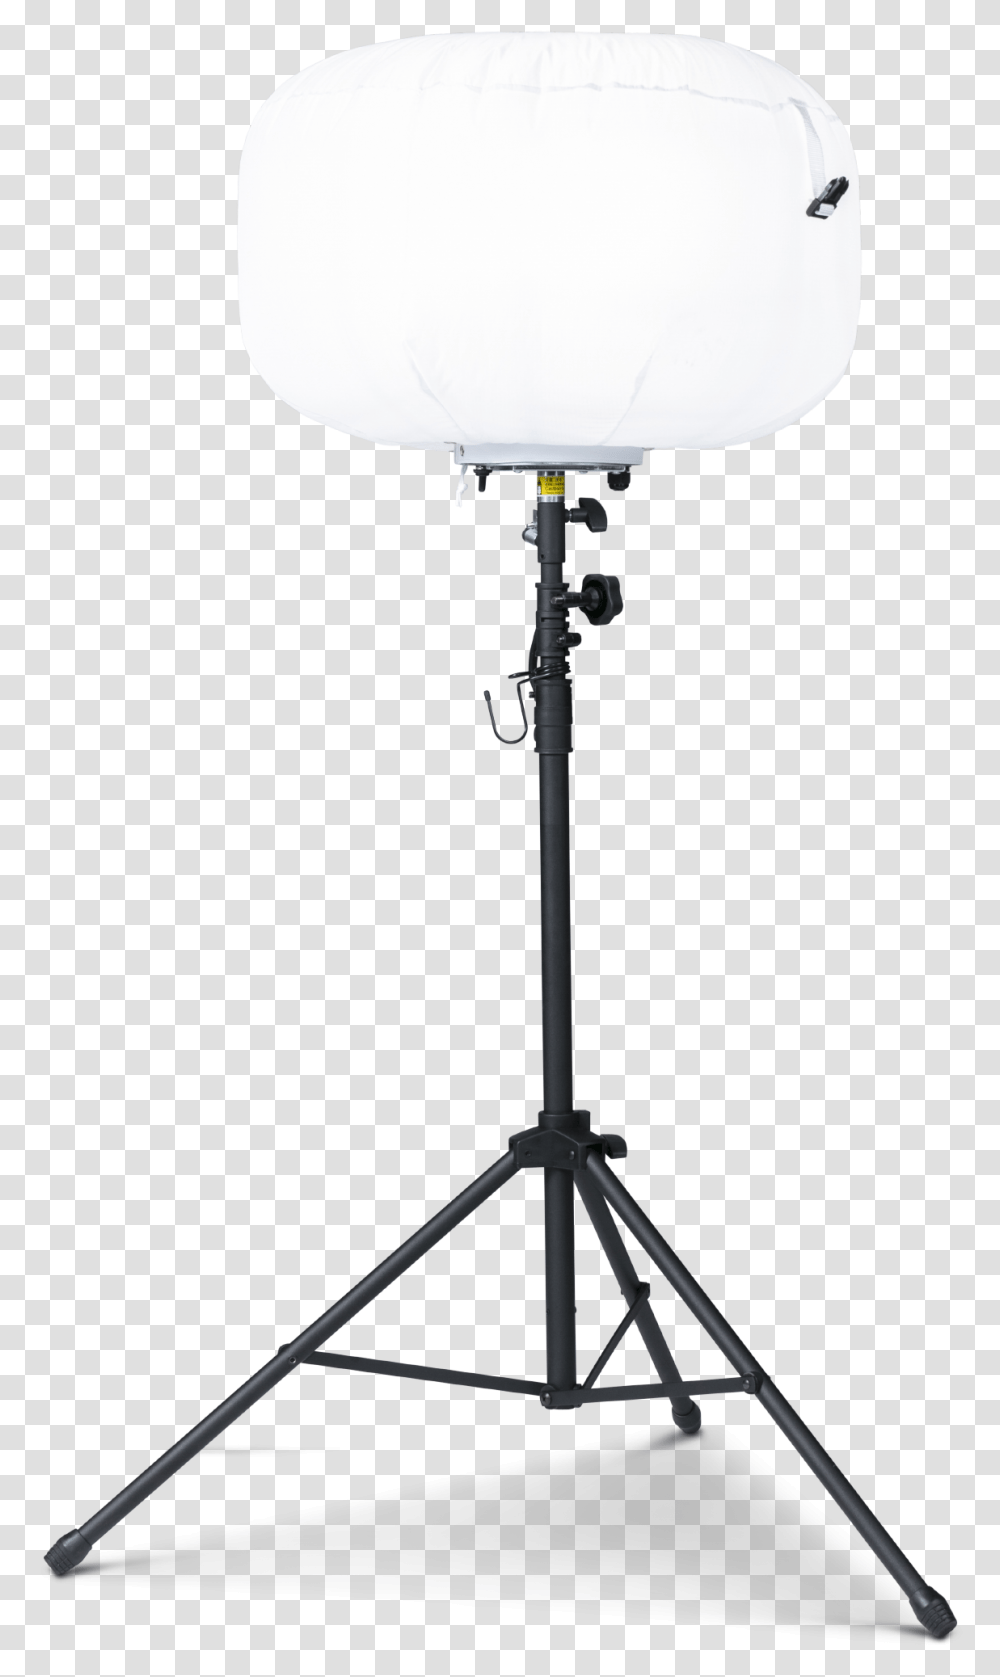 Yuang Light Led Balloon Light Brighten Up Your Night Inflatable Led Tripod Balloon, Lamp, Lighting, Utility Pole, Lampshade Transparent Png